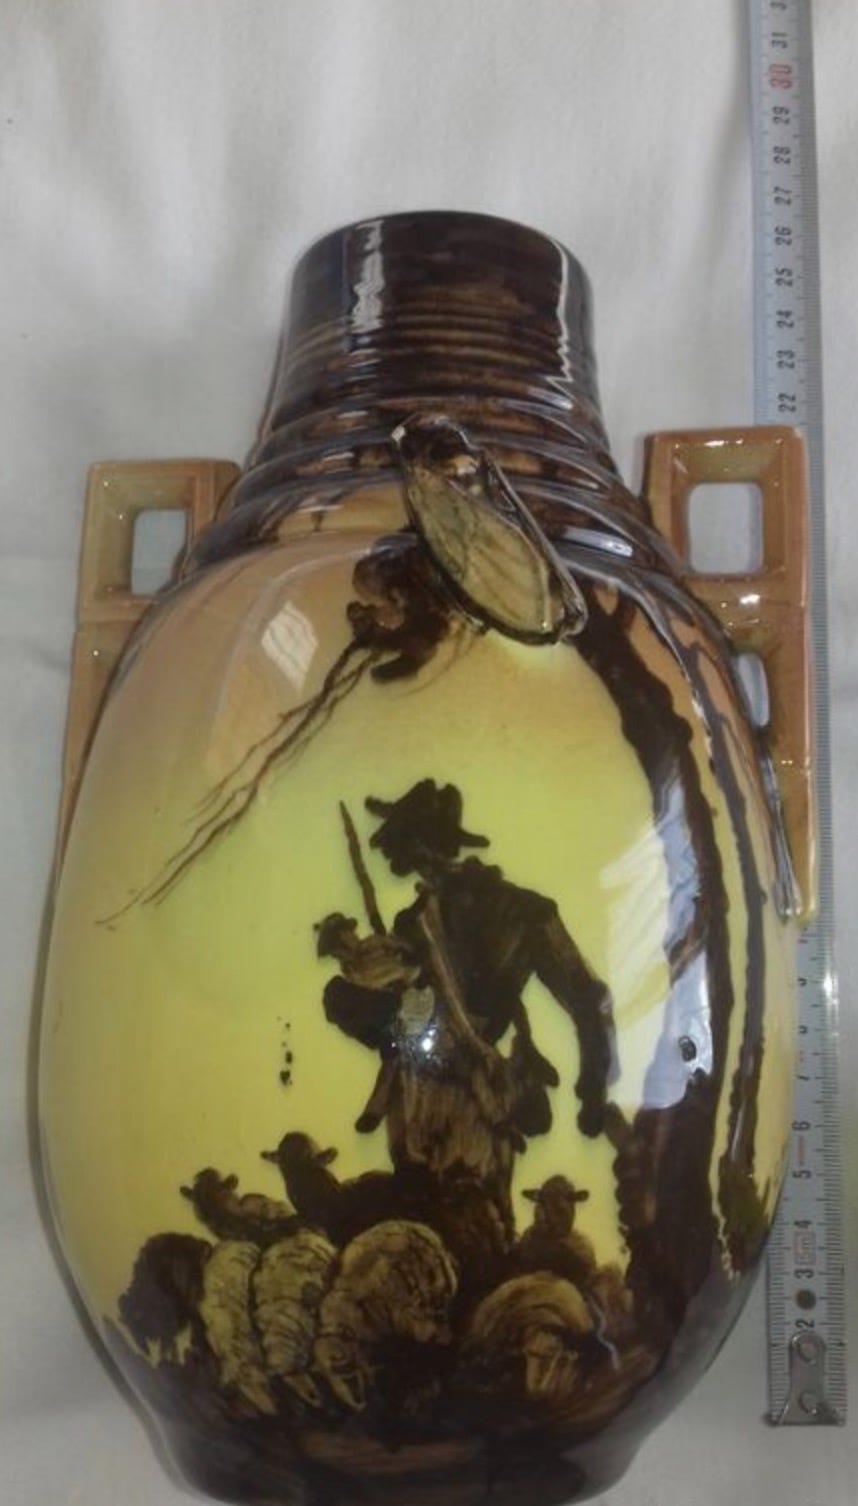 G. Ferry, Shepherd in Provence, vase with applied cicadas, 24 cm, Le Bon Coin, Digne, 2021.